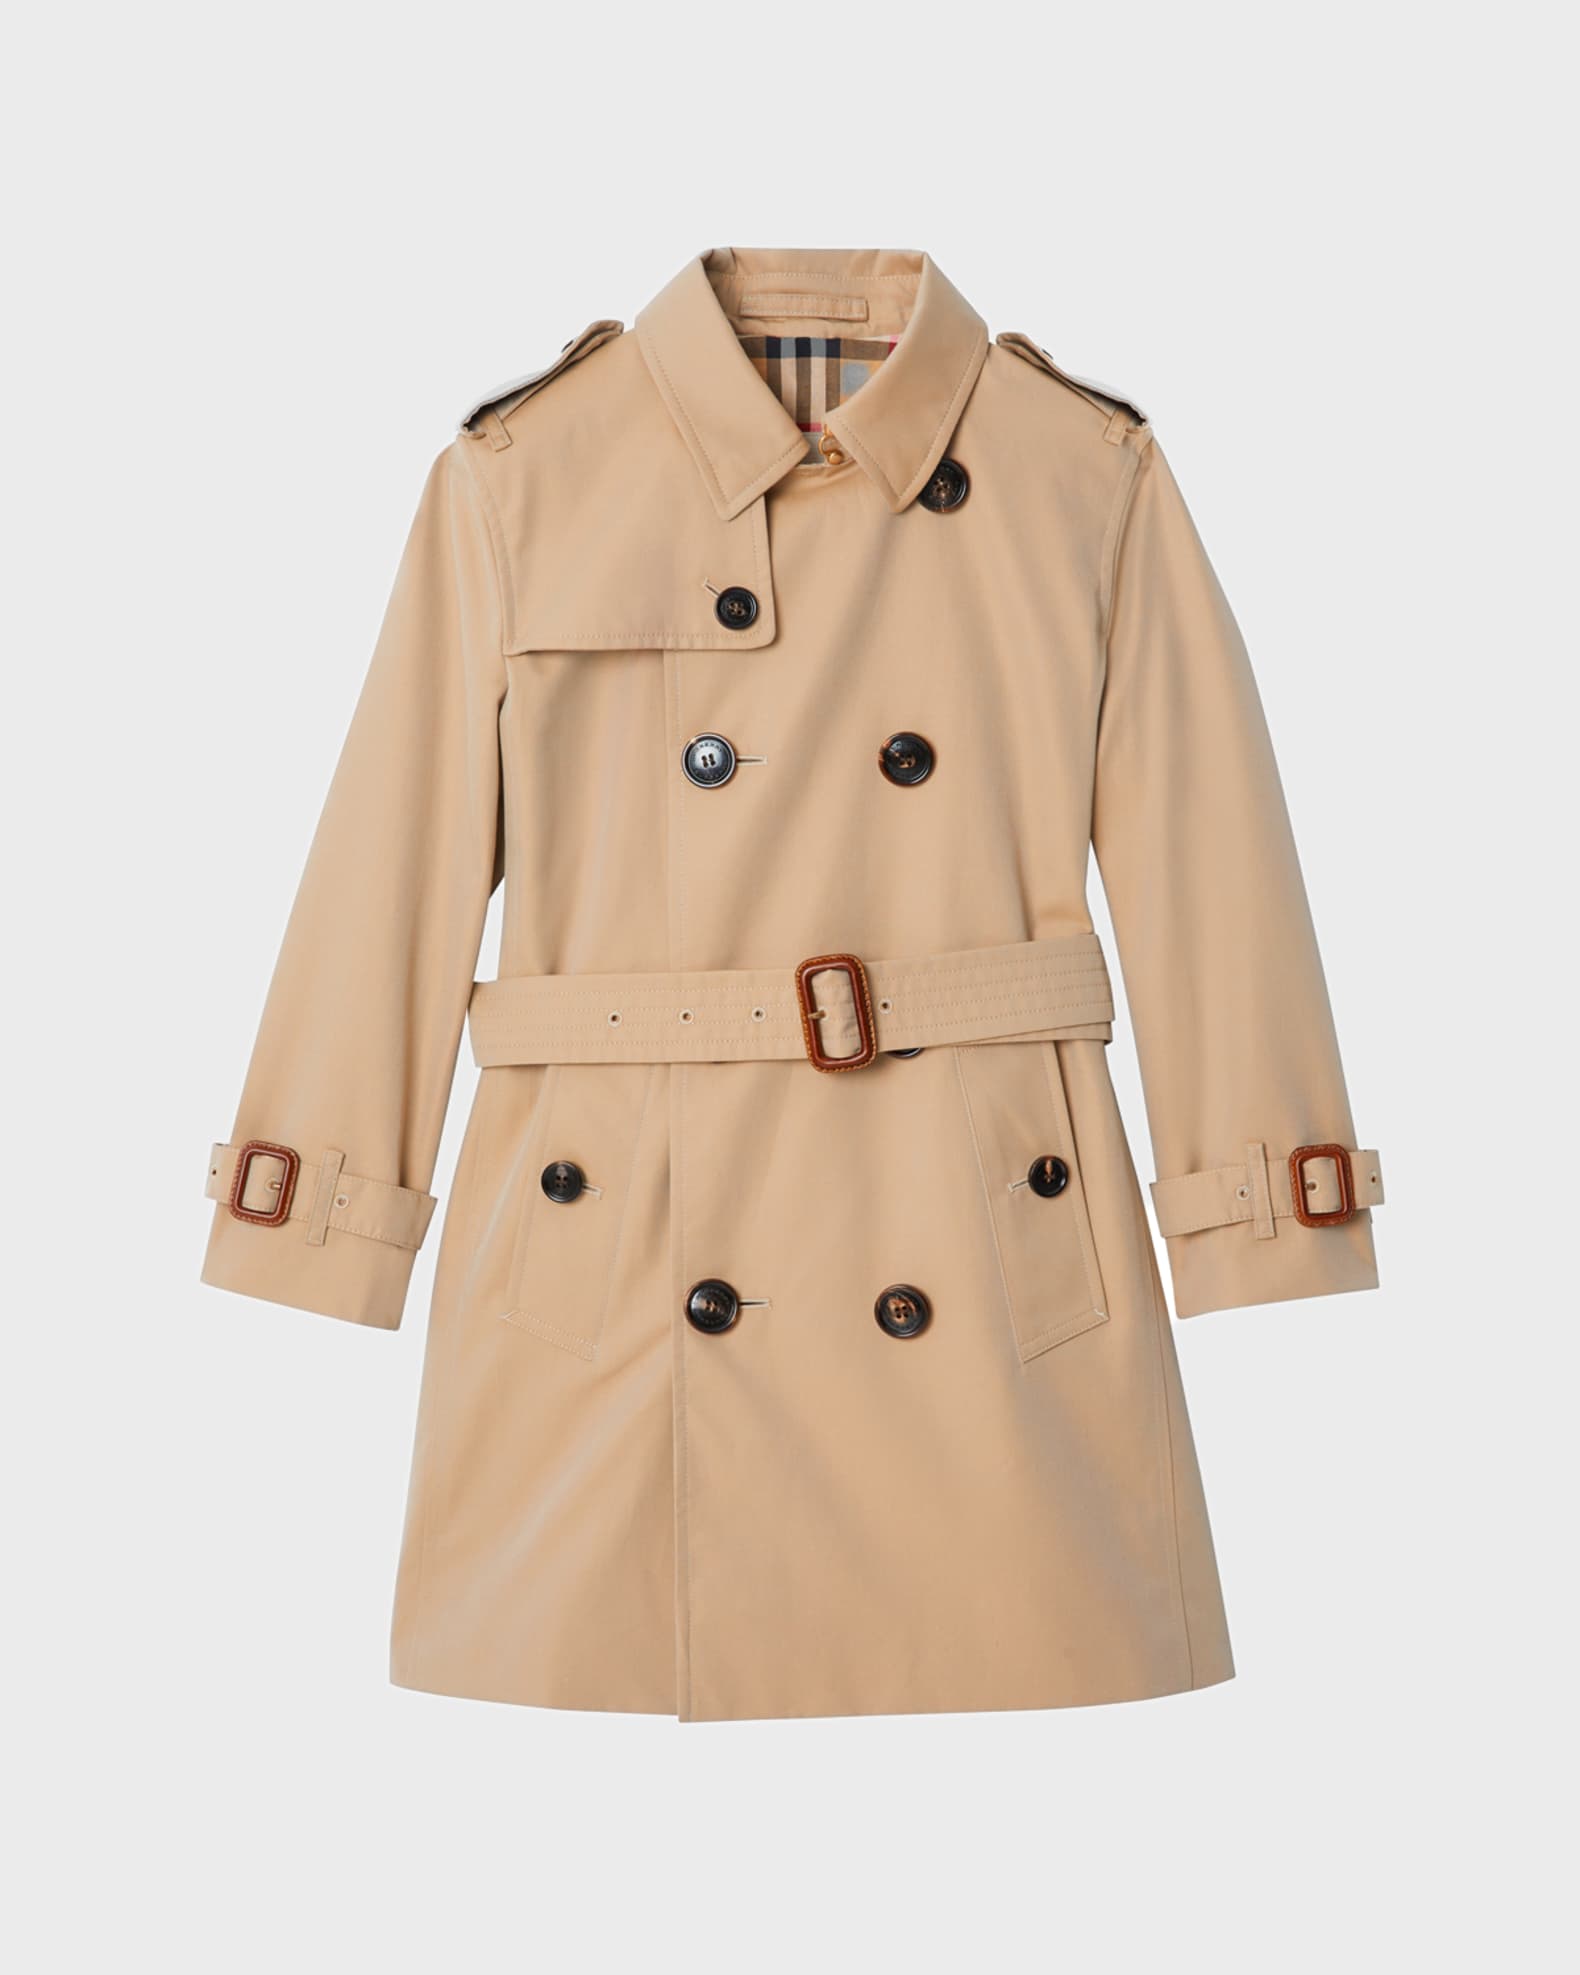 Mayfair Collared Trench Coat, Size 3-14 0